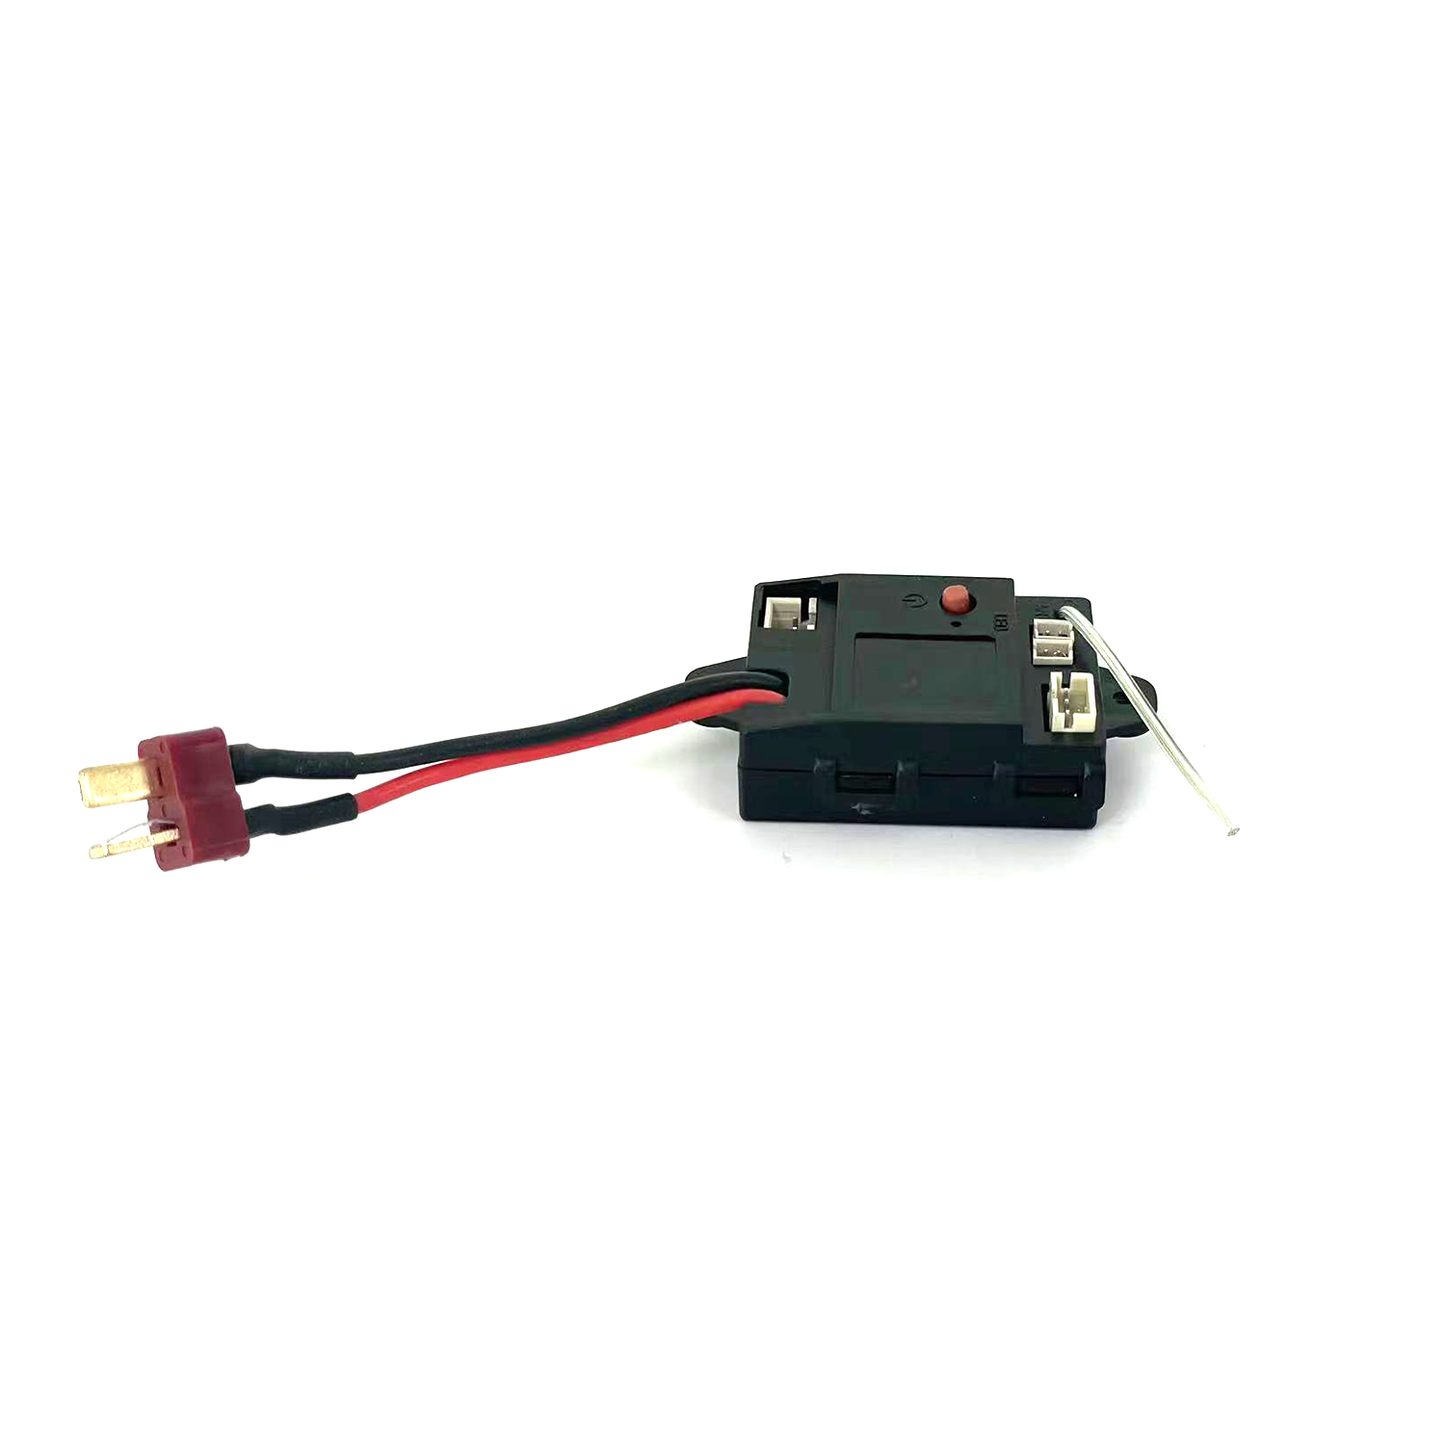 Rlaarlo #XDKJ-005 Parts, Electronic Speed Controller, 60A Original Receiver Replacement Part